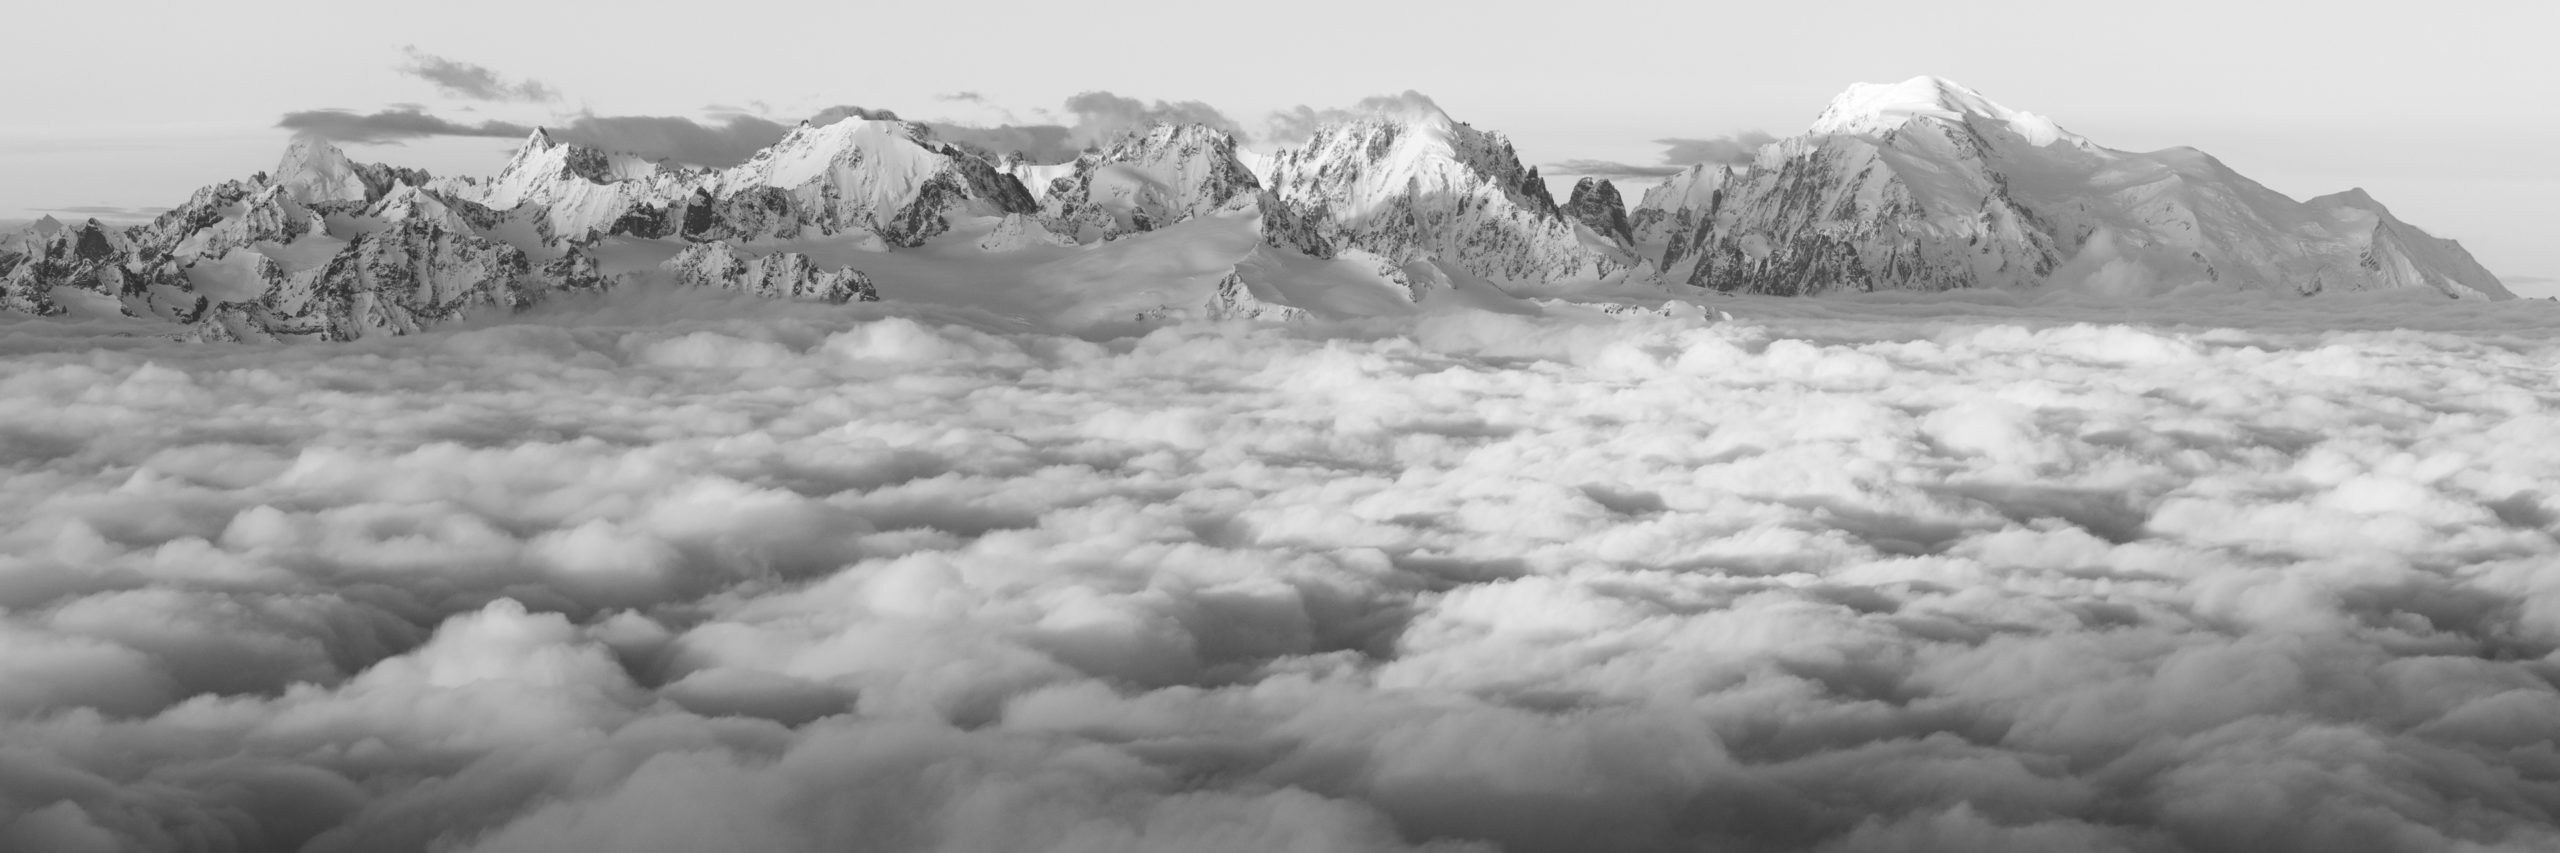 black and white panorama mountain view of the  mont blanc above a sea of clouds - black and white mountain photo print and professional framing